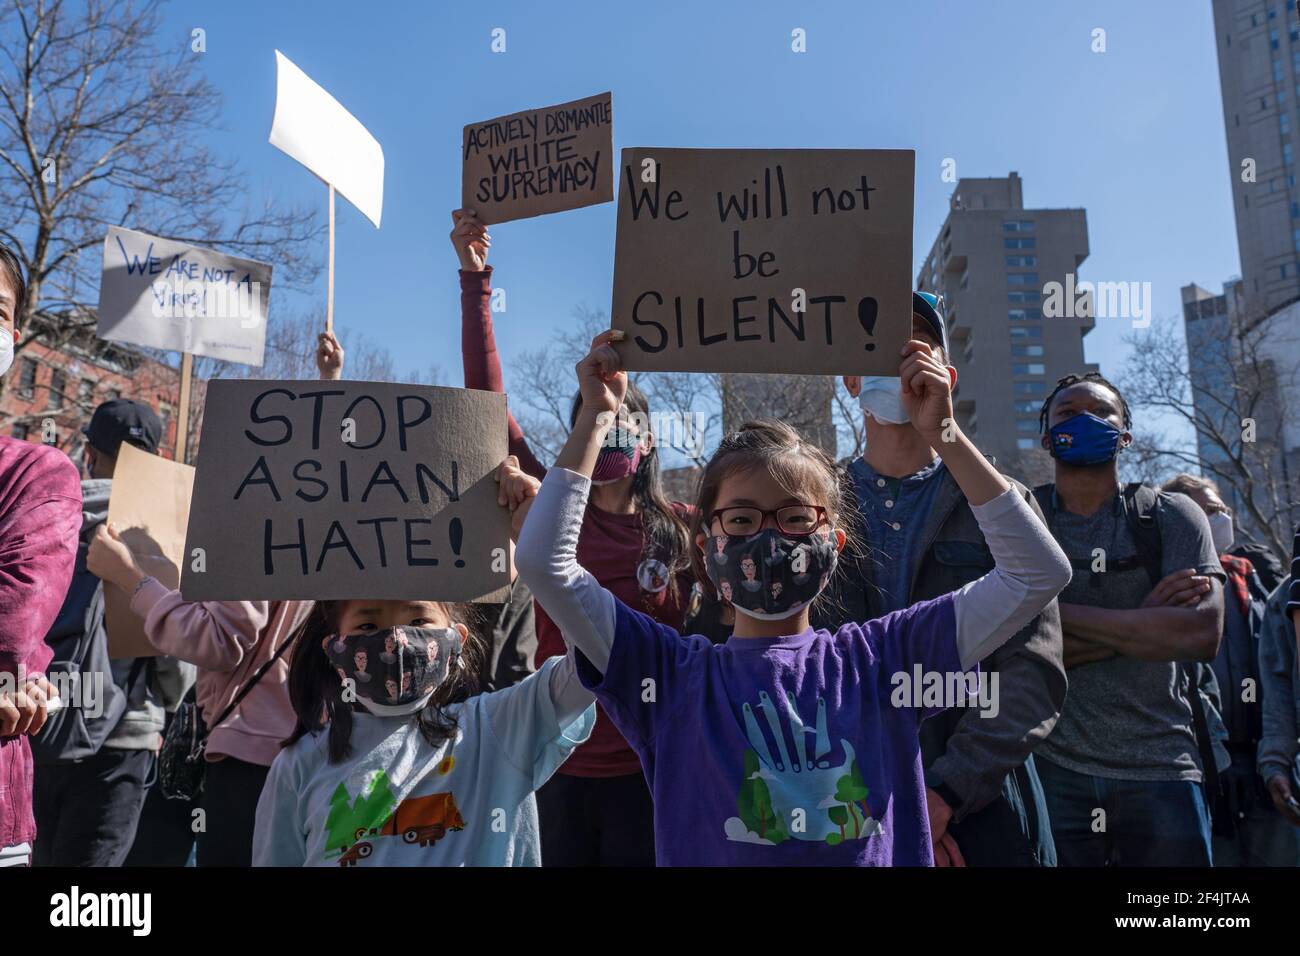 NEW YORK, NY - MARCH 21: Children hold signs that reads 'stop Asian hate' and 'we will not be silent!' at a rally against hate in Columbus Park in the Chinatown neighborhood of Manhattan on March 21, 2021 in New York City. A rally for solidarity was organized in response to a rise in hate crimes against the Asian community since the start of the coronavirus (COVID-19) pandemic in 2020. On March 16 in Atlanta, Georgia, a man went on a shooting spree in three spas that left eight people dead, including six Asian women.Protesters hold placards during a rally against hate in Columbus Park in the C Stock Photo